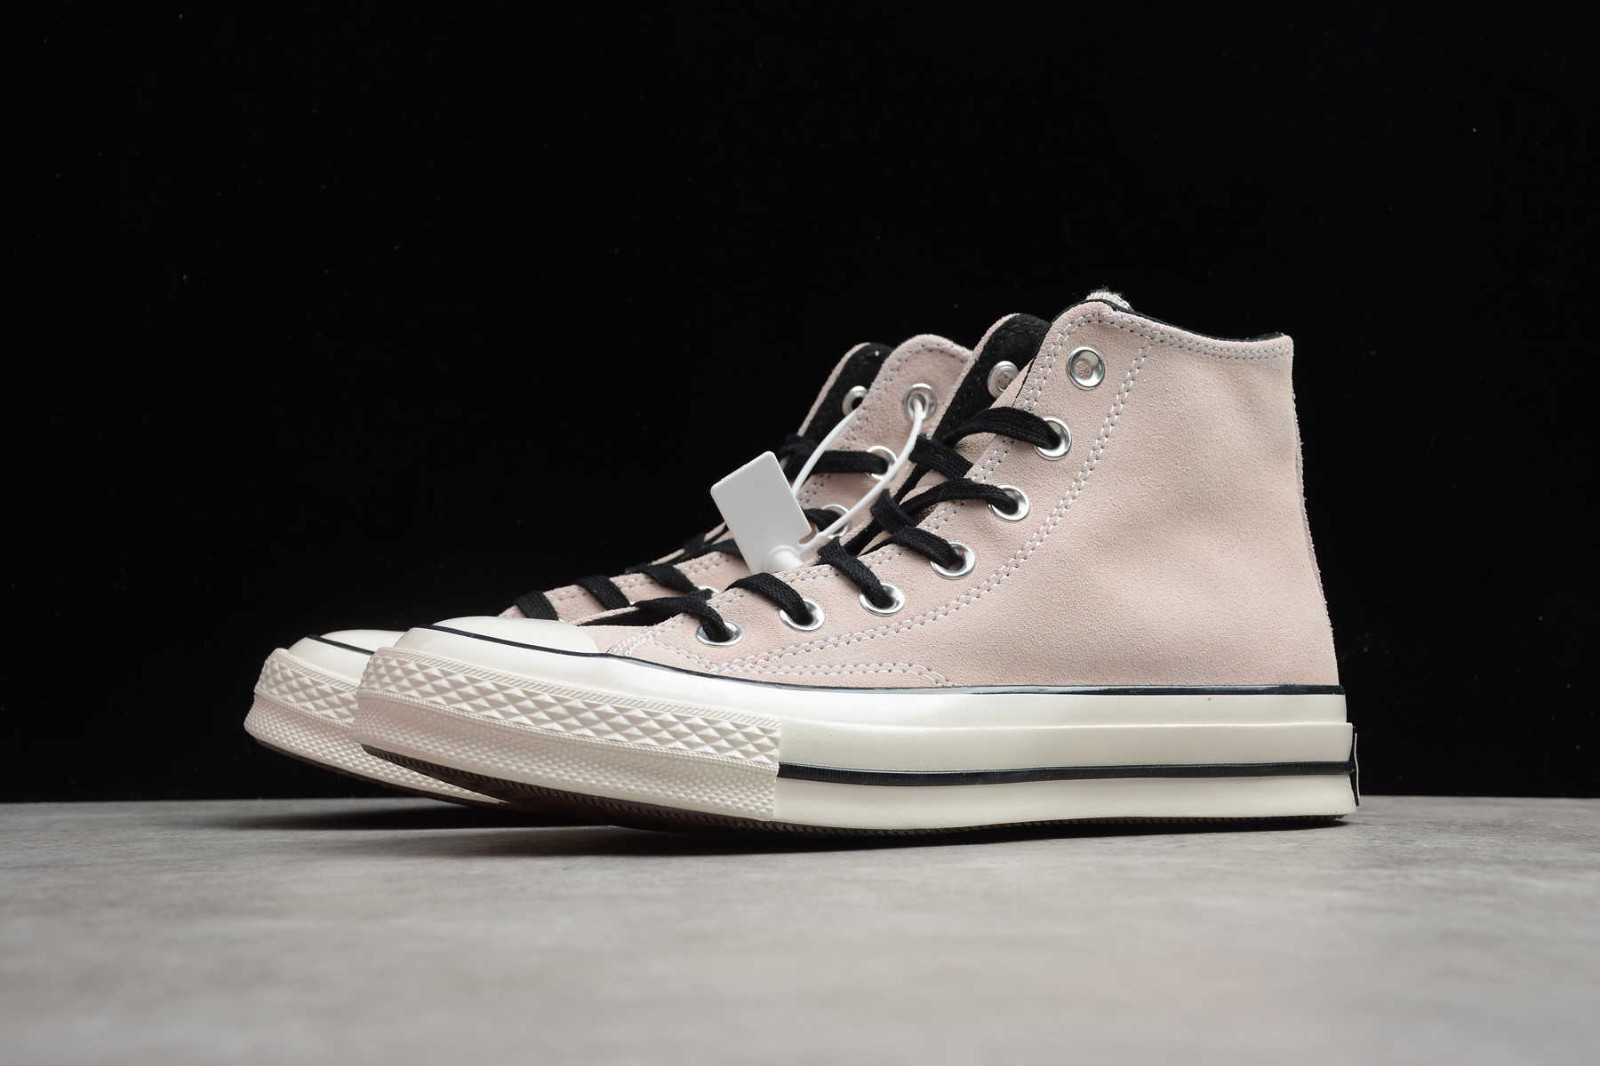 Site line Anonym Persona Converse Chuck Taylor All Star 70 Suede High Silt Red Black Egret 169335C -  MultiscaleconsultingShops